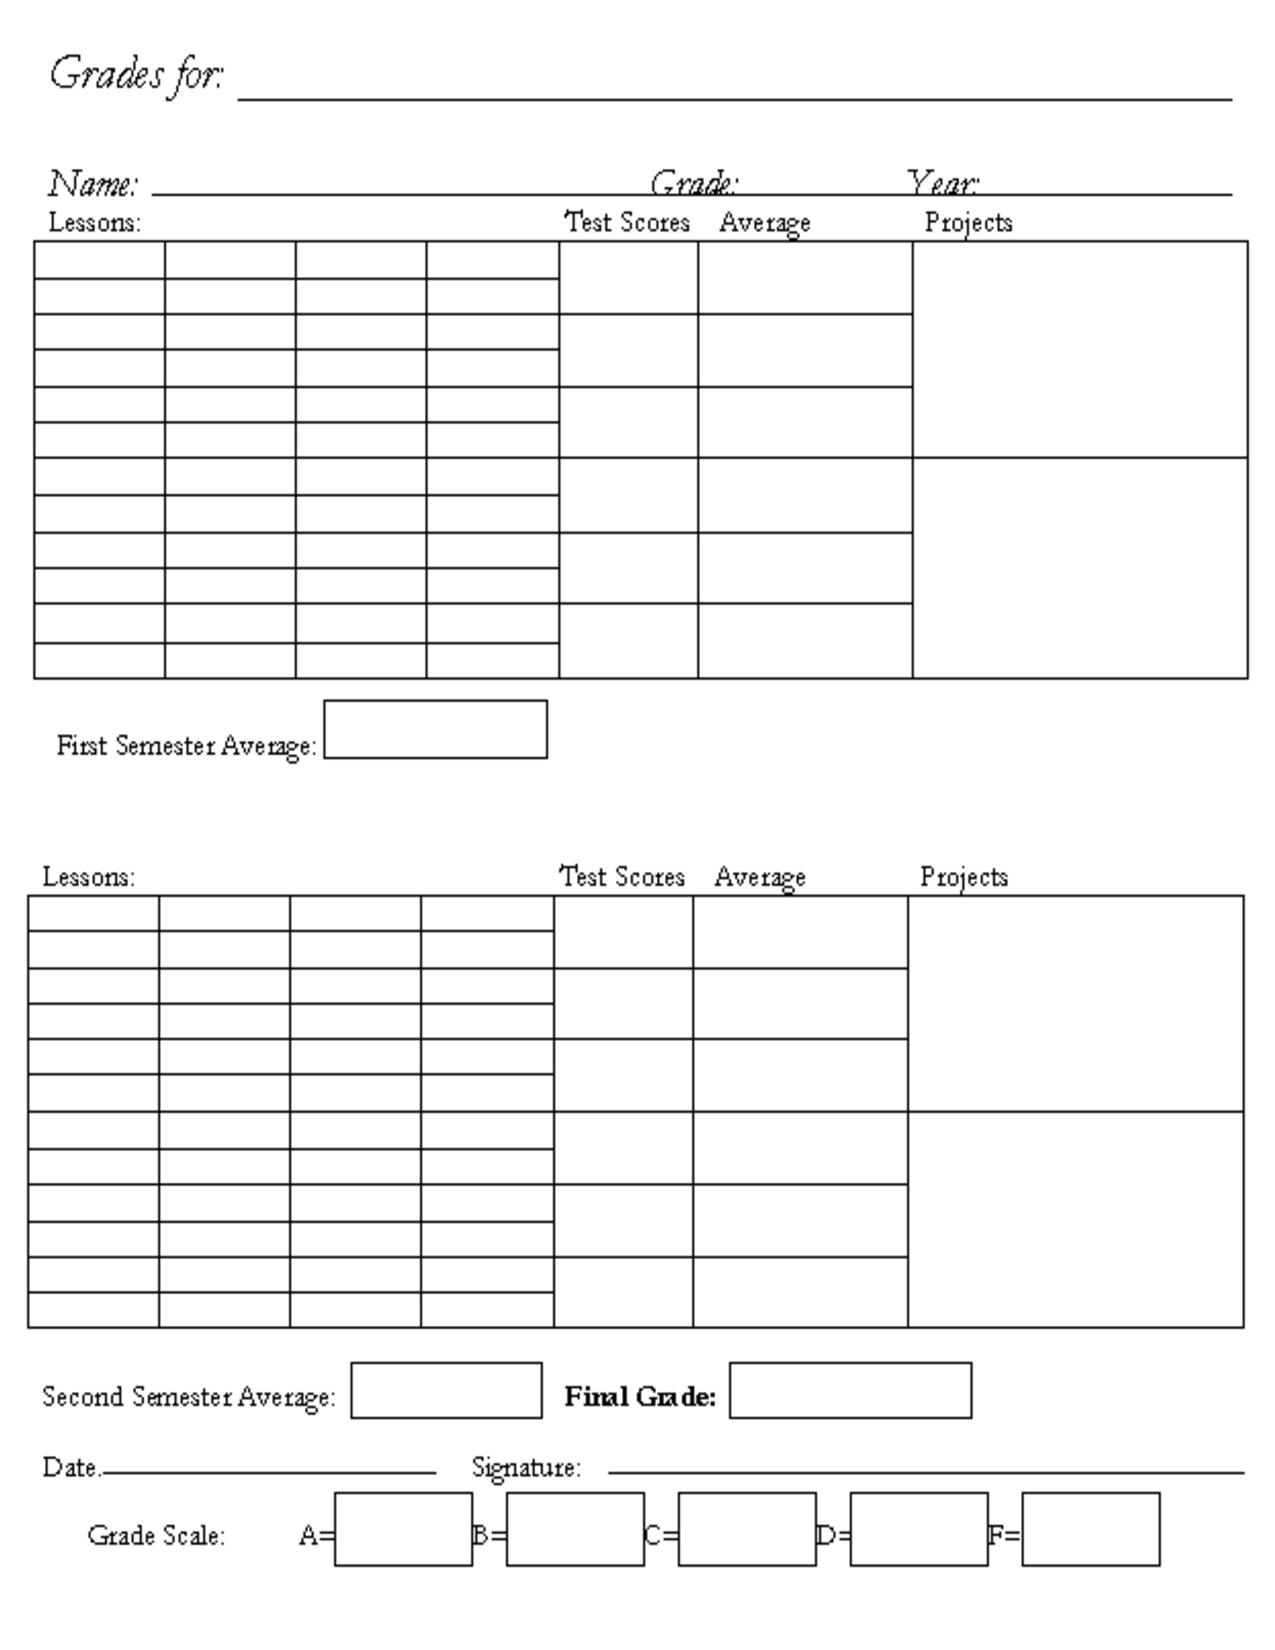 002 Free Report Card Template Surprising Ideas Dog Grooming Pertaining To Homeschool Report Card Template